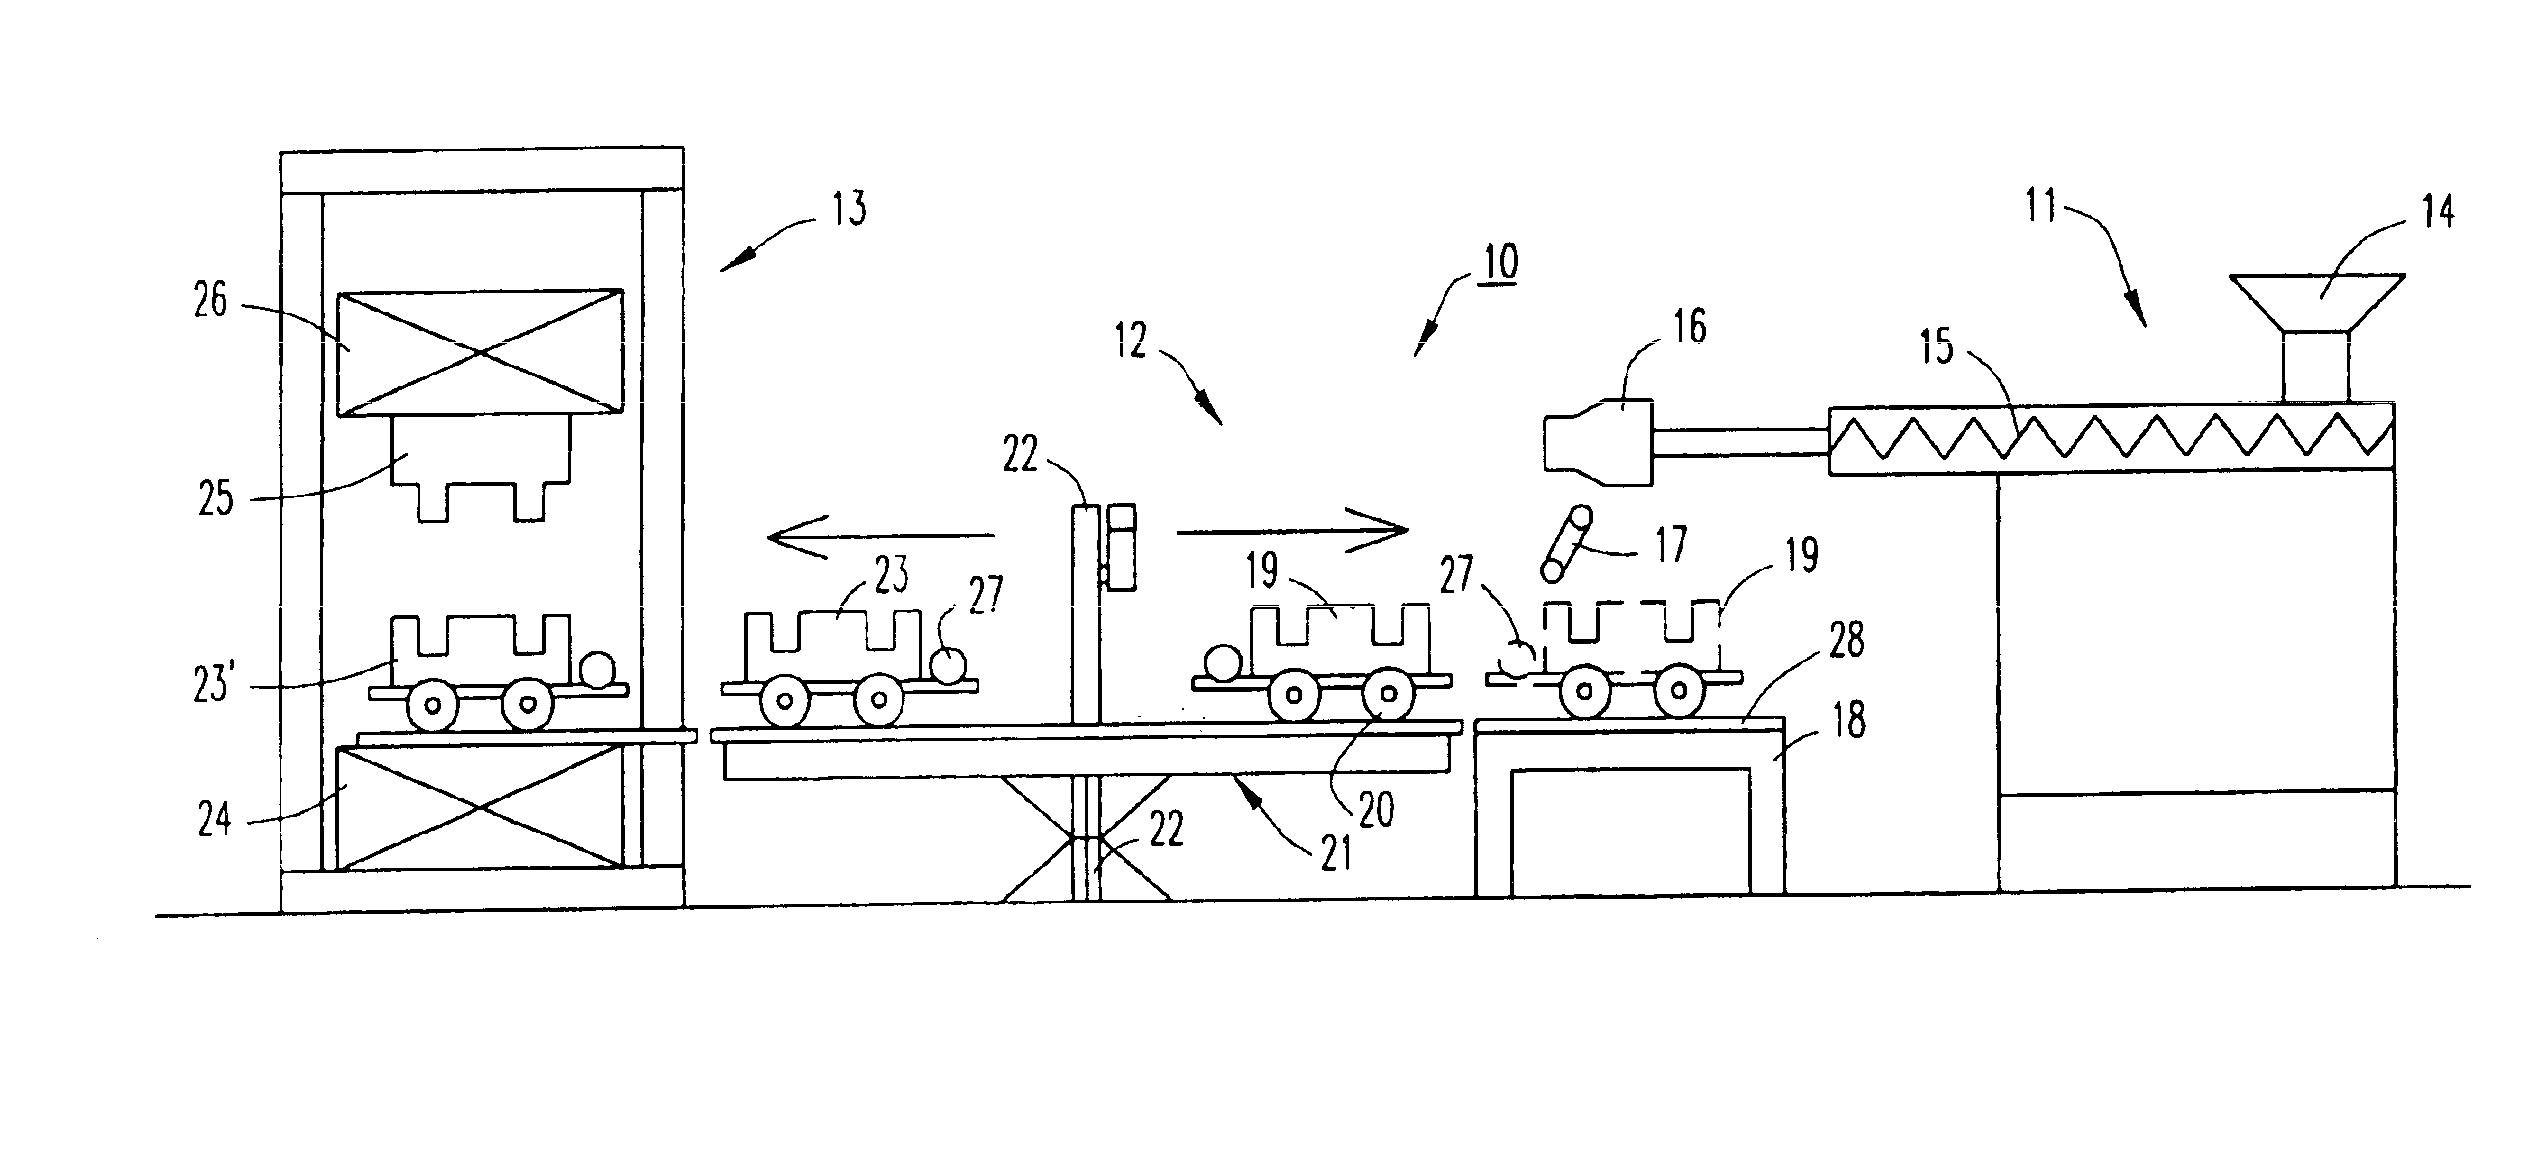 Thermoplastic molding process and apparatus